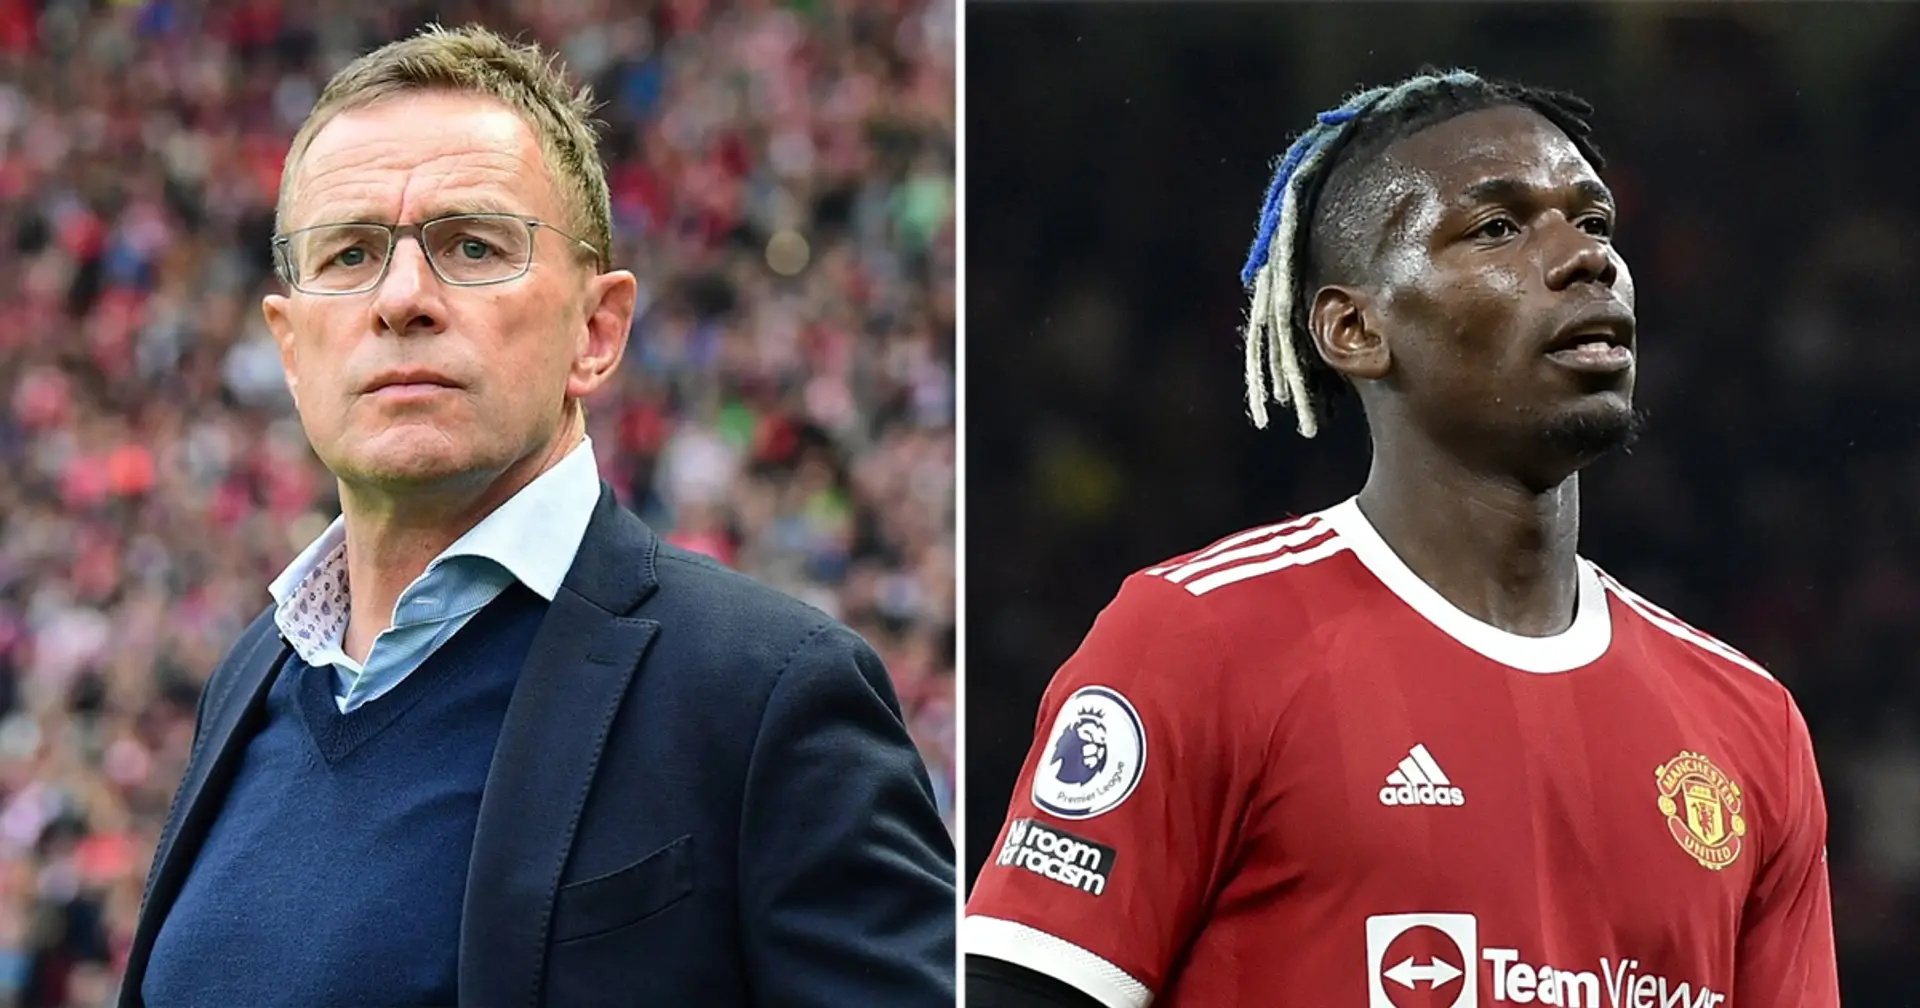 Man United 'targeting' two players as Pogba replacements - one of them plays at Rangnick's former club